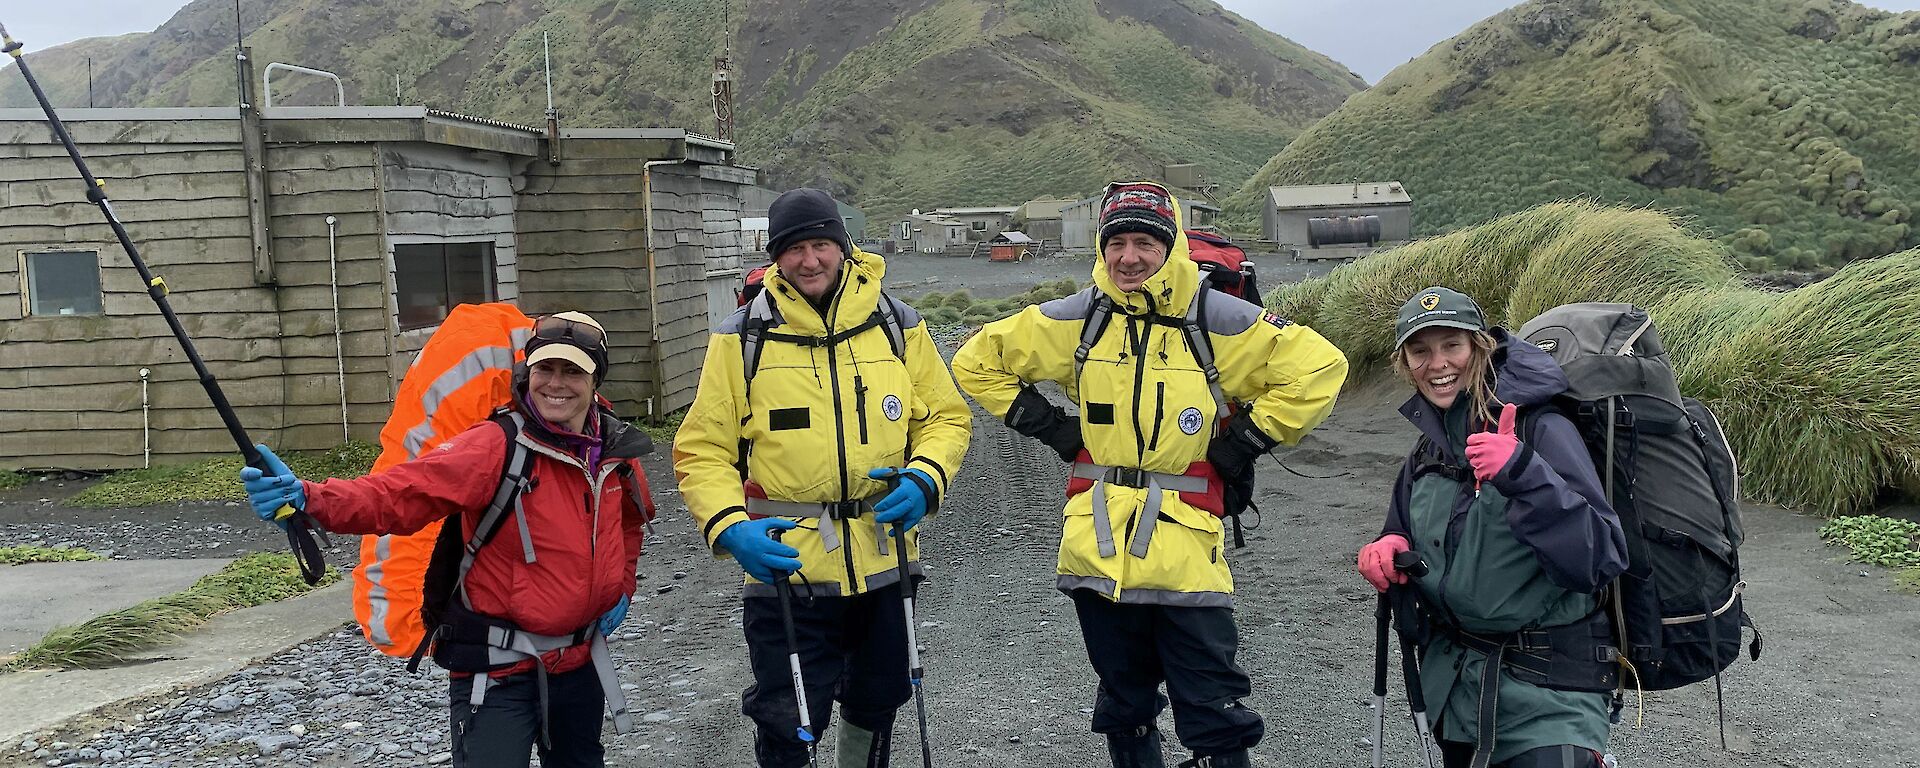 four people wear hiking gear ready to go on a hike